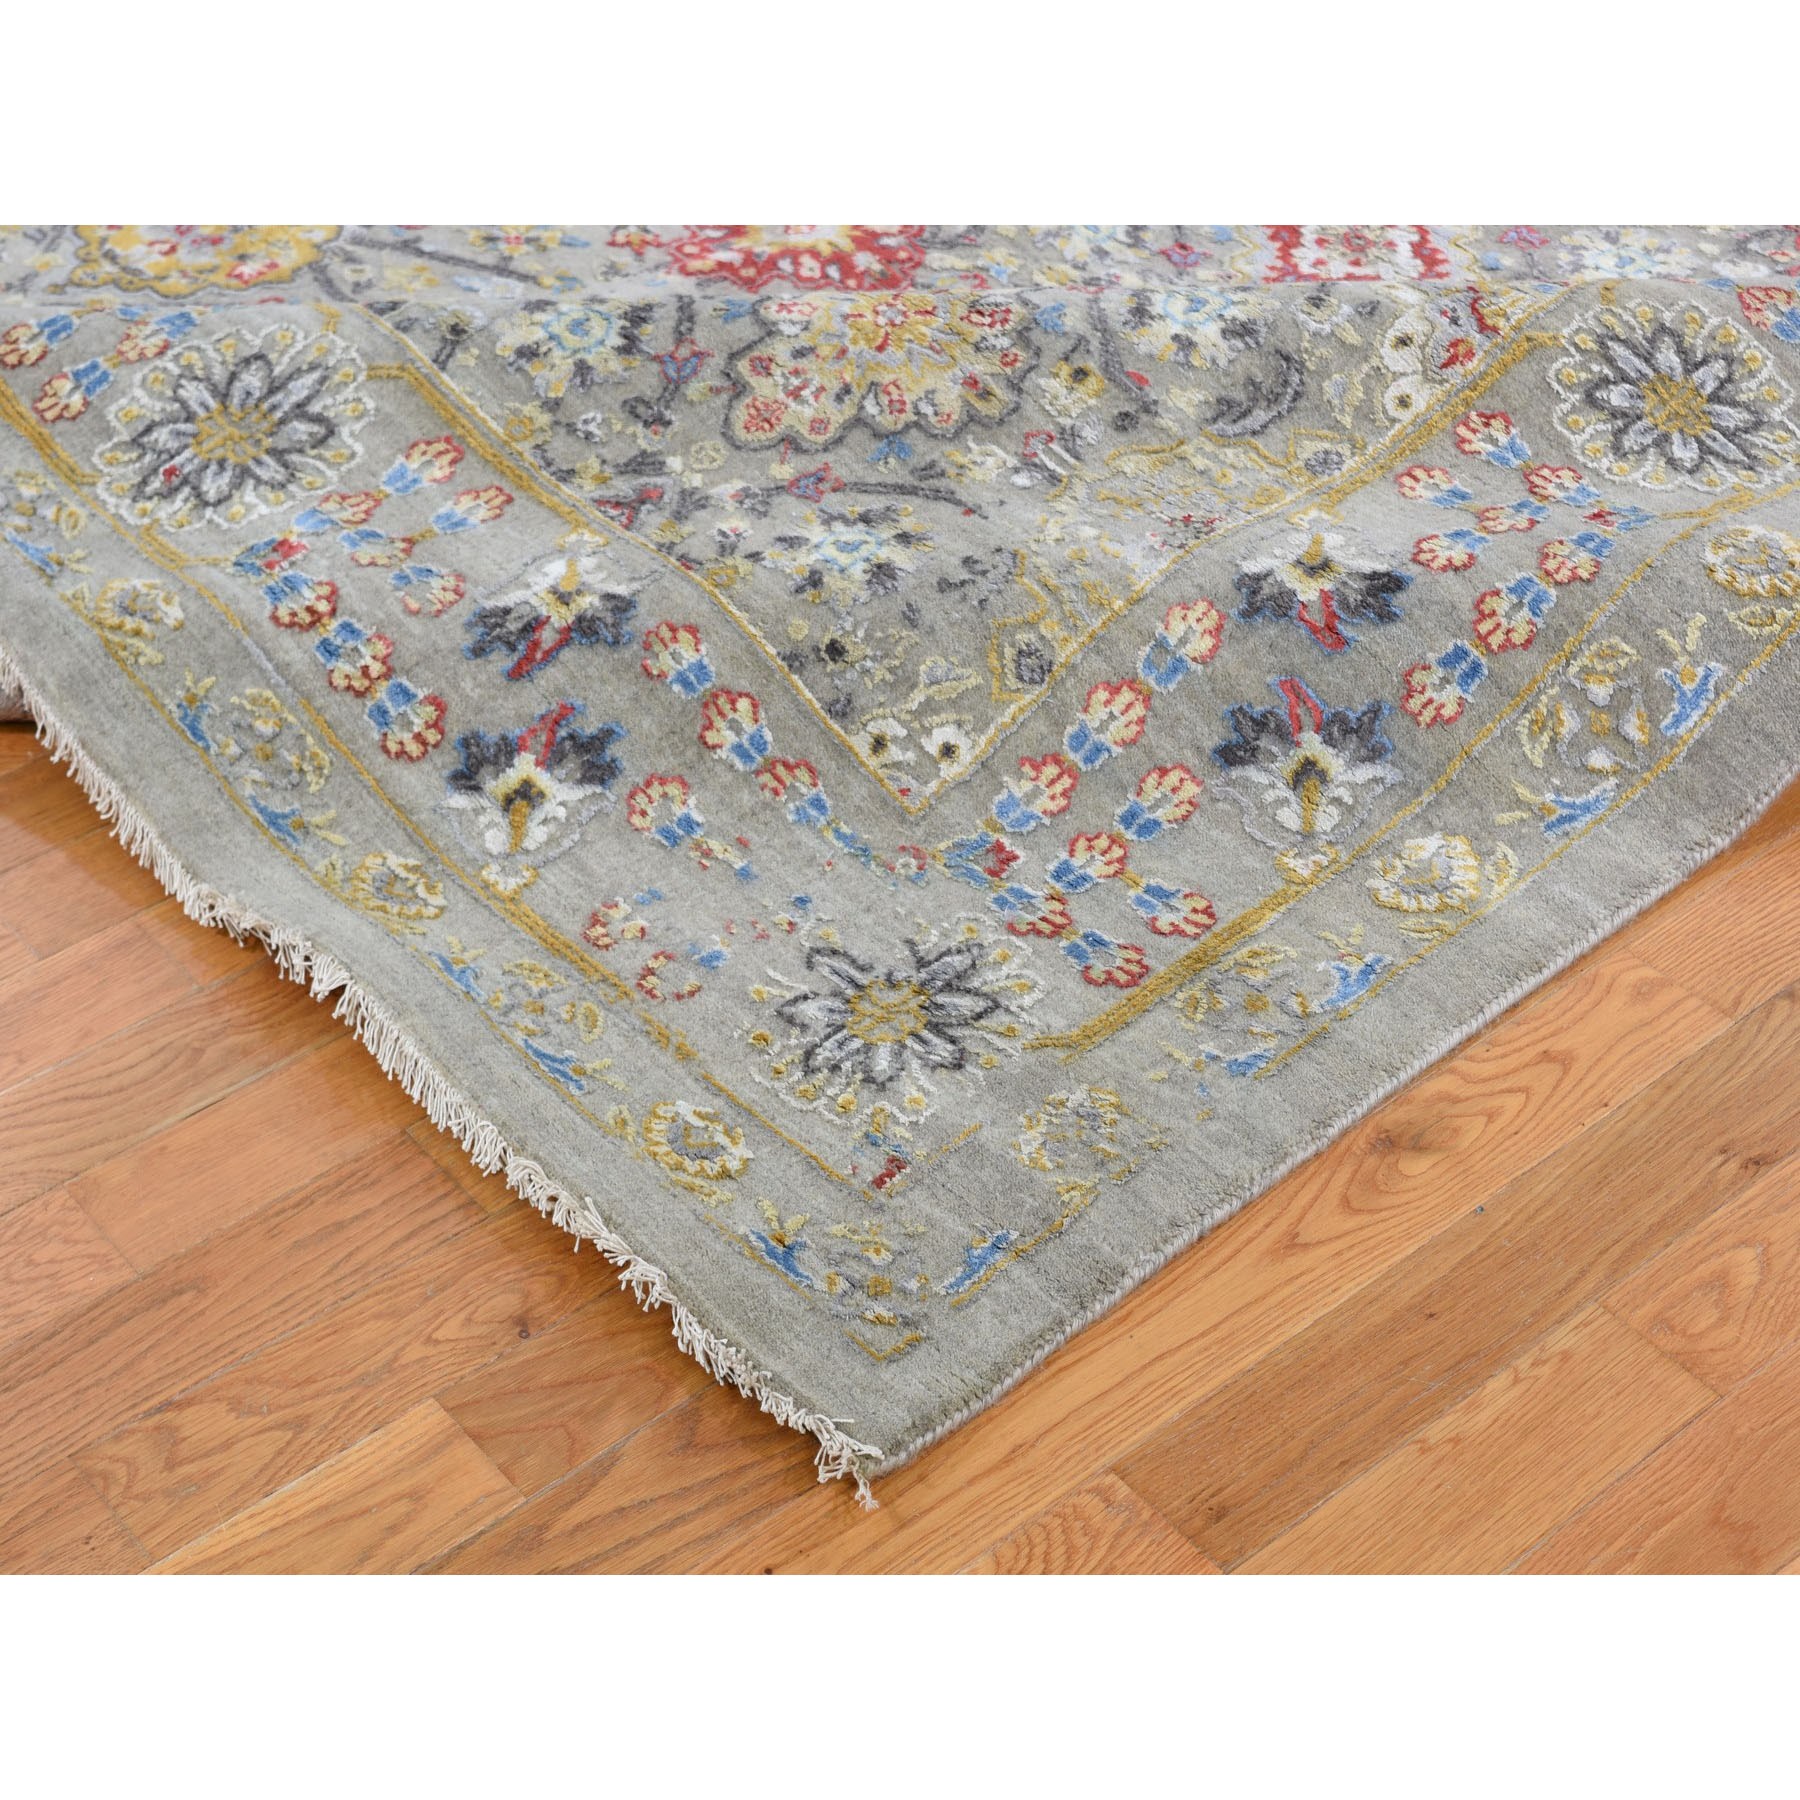 10'3"x10'3" Square THE SUNSET ROSETTES Wool And Pure Silk Hand Woven Oriental Rug 